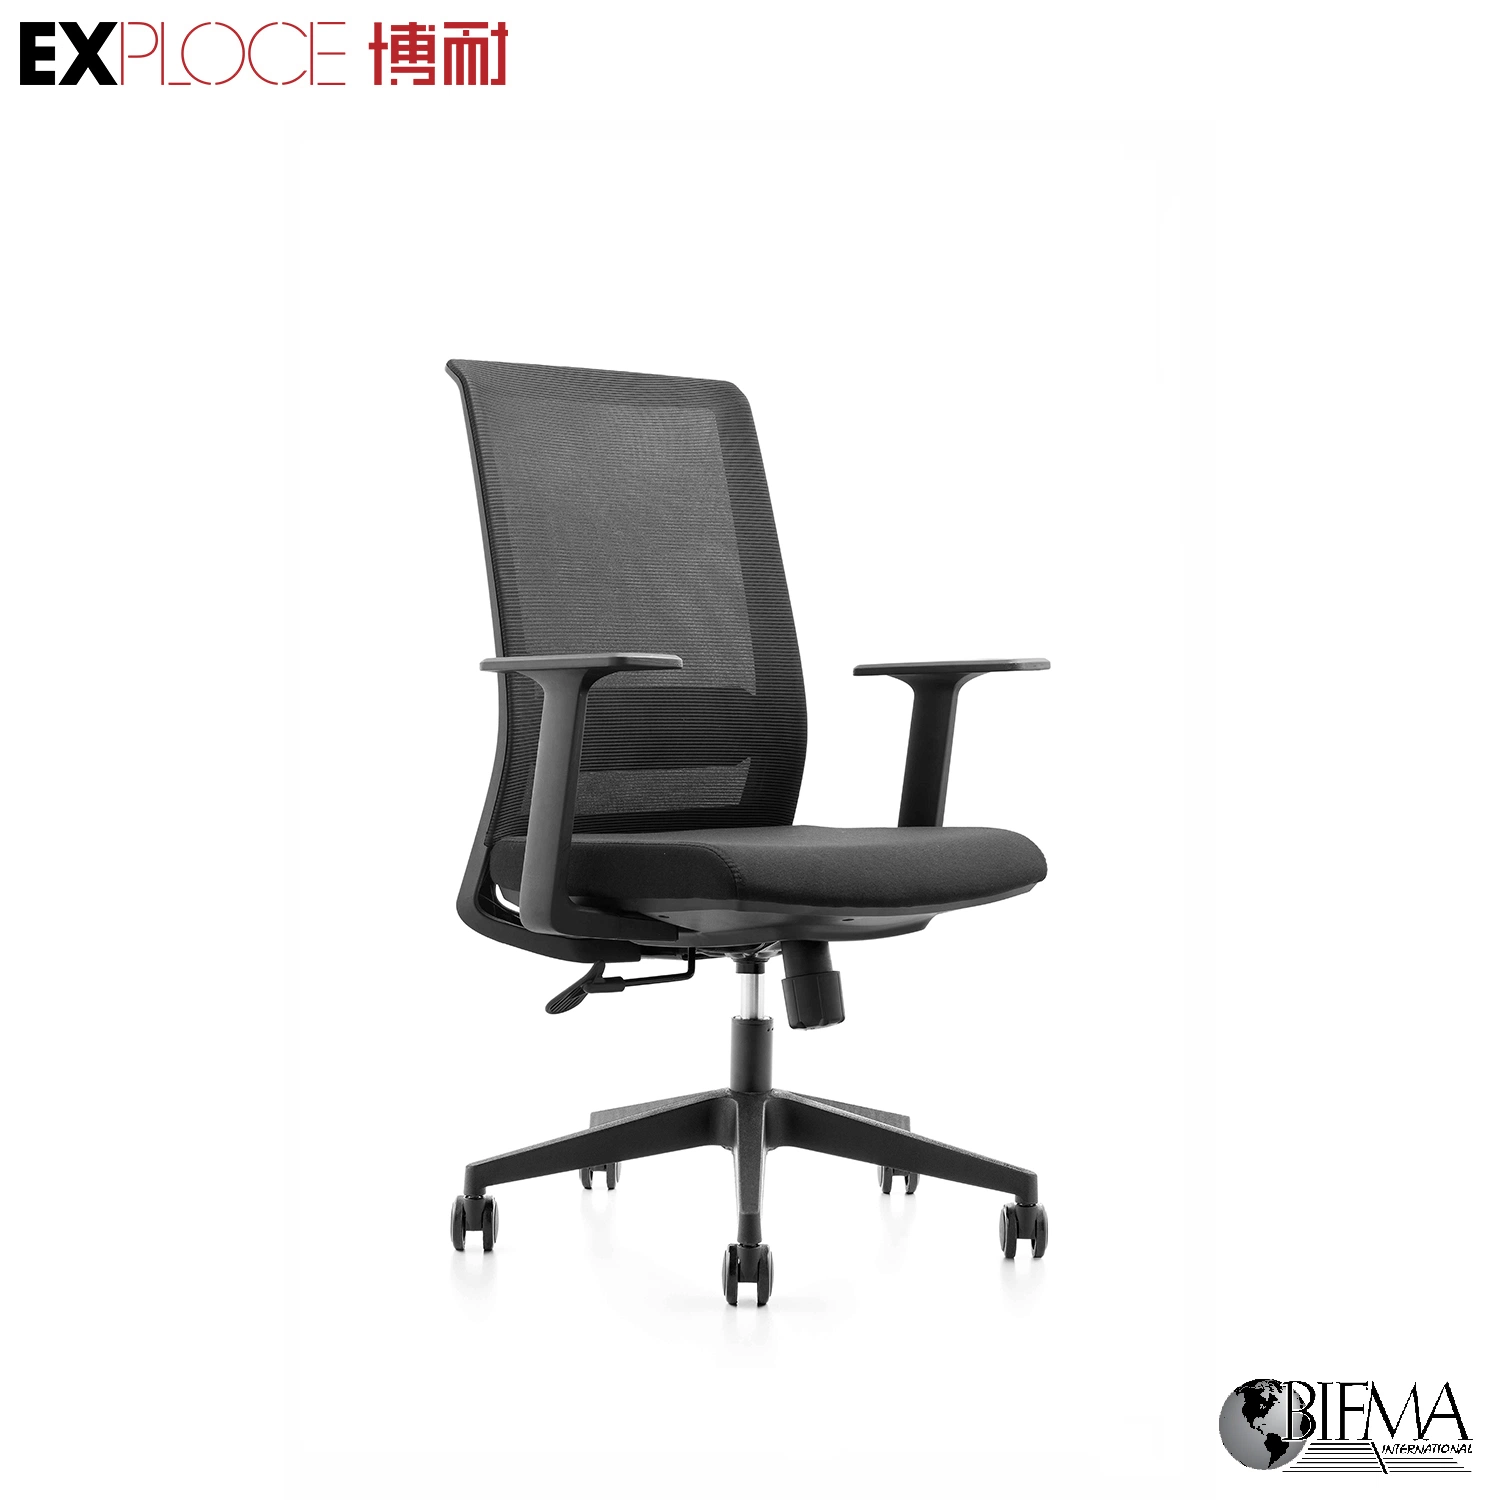 MID Back Executive Chair Best Ergonomic Mesh Office Chair with Headrest